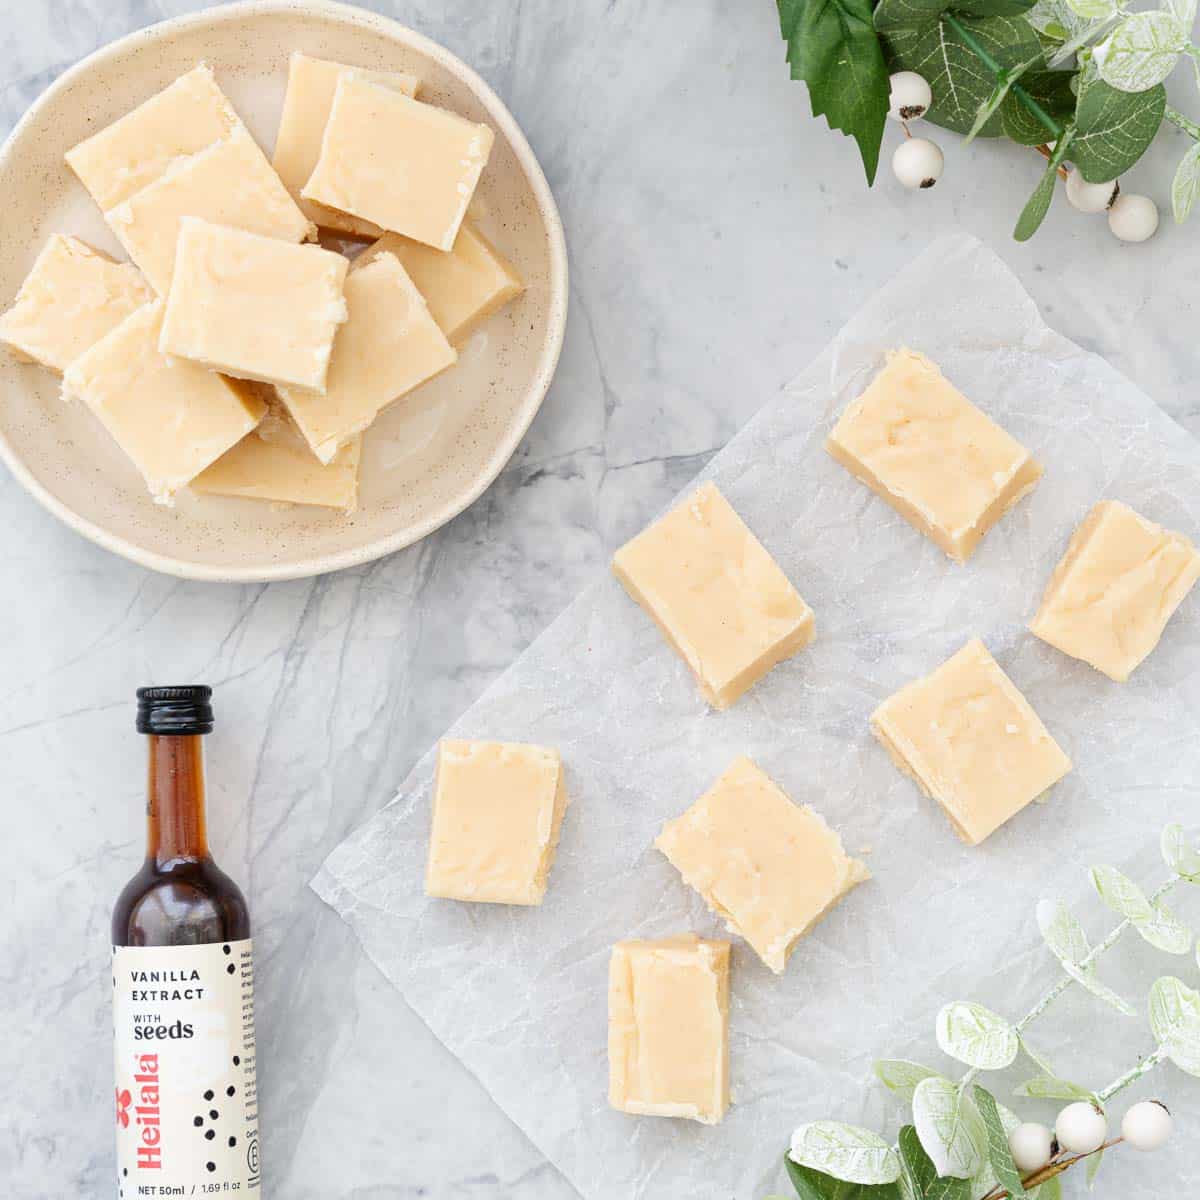 Slices of fudge resting a sheet of crinkled baking paper next to a serving dish of stacked slices and a small bottle of Heilala vanilla extract and christmas holly 